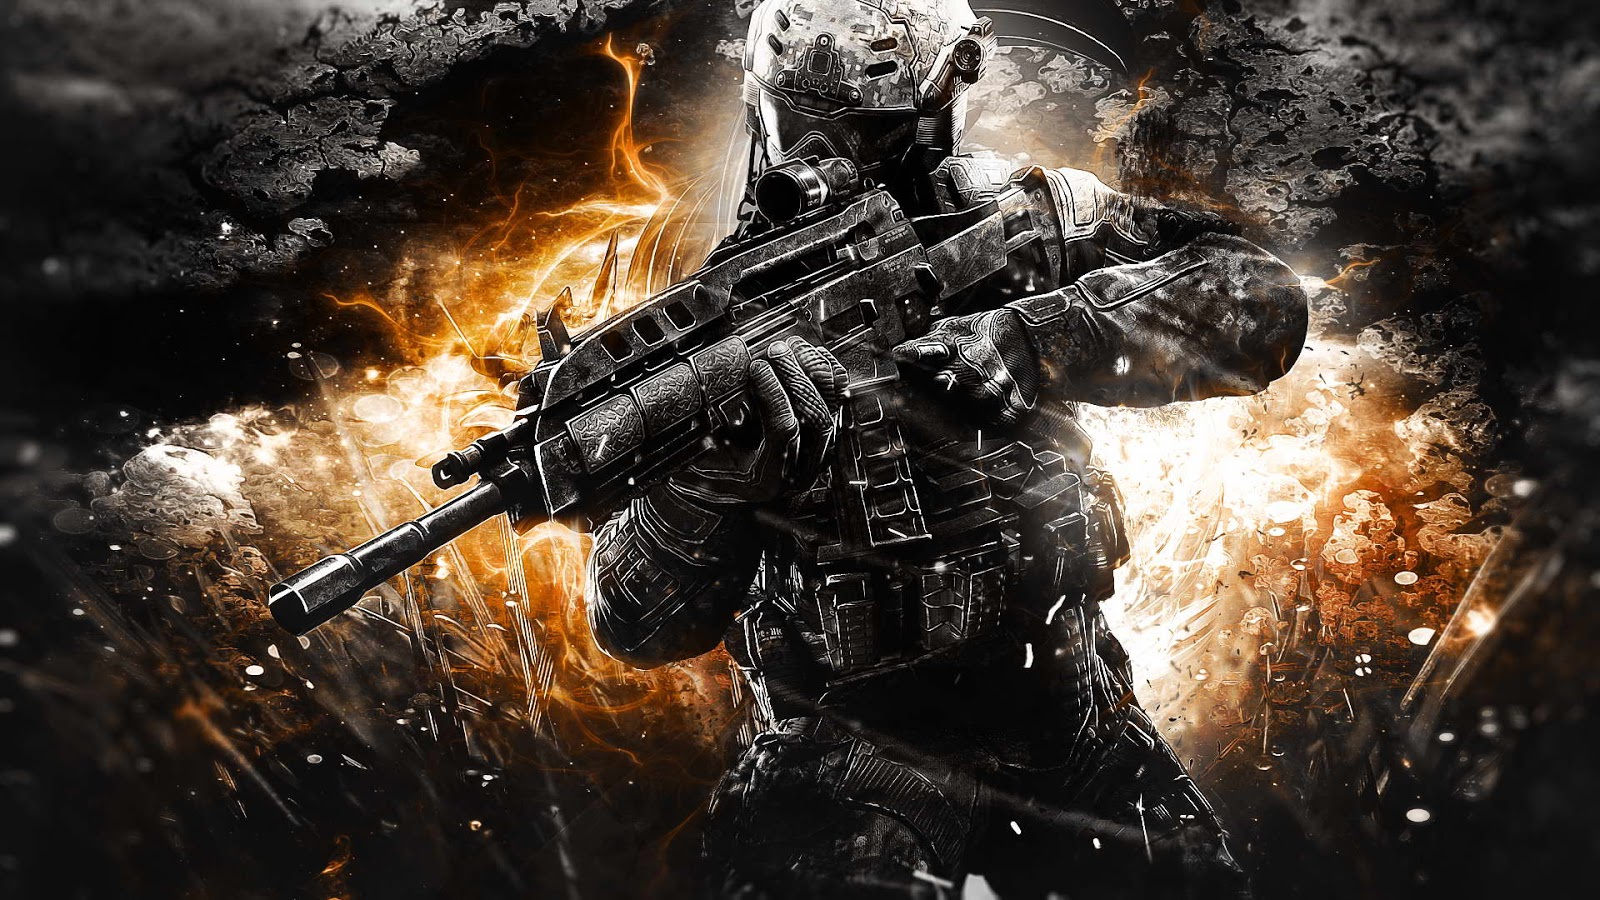 call of duty 2 zombies wallpapercod black ops 2 zombies wallpapers hd 1600x900